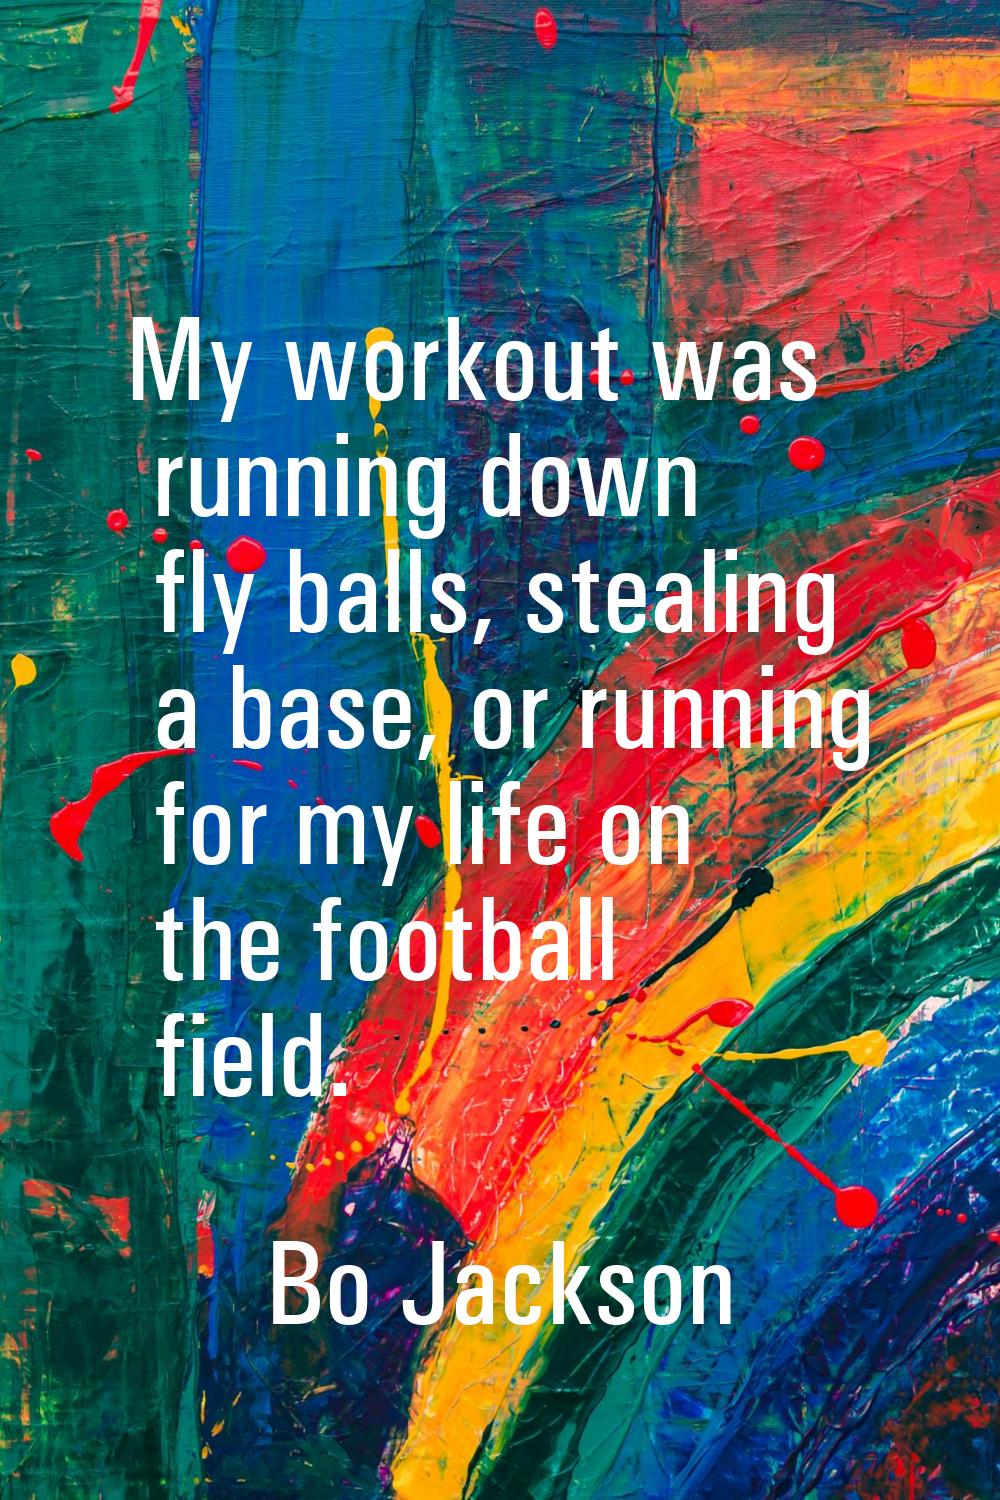 My workout was running down fly balls, stealing a base, or running for my life on the football fiel